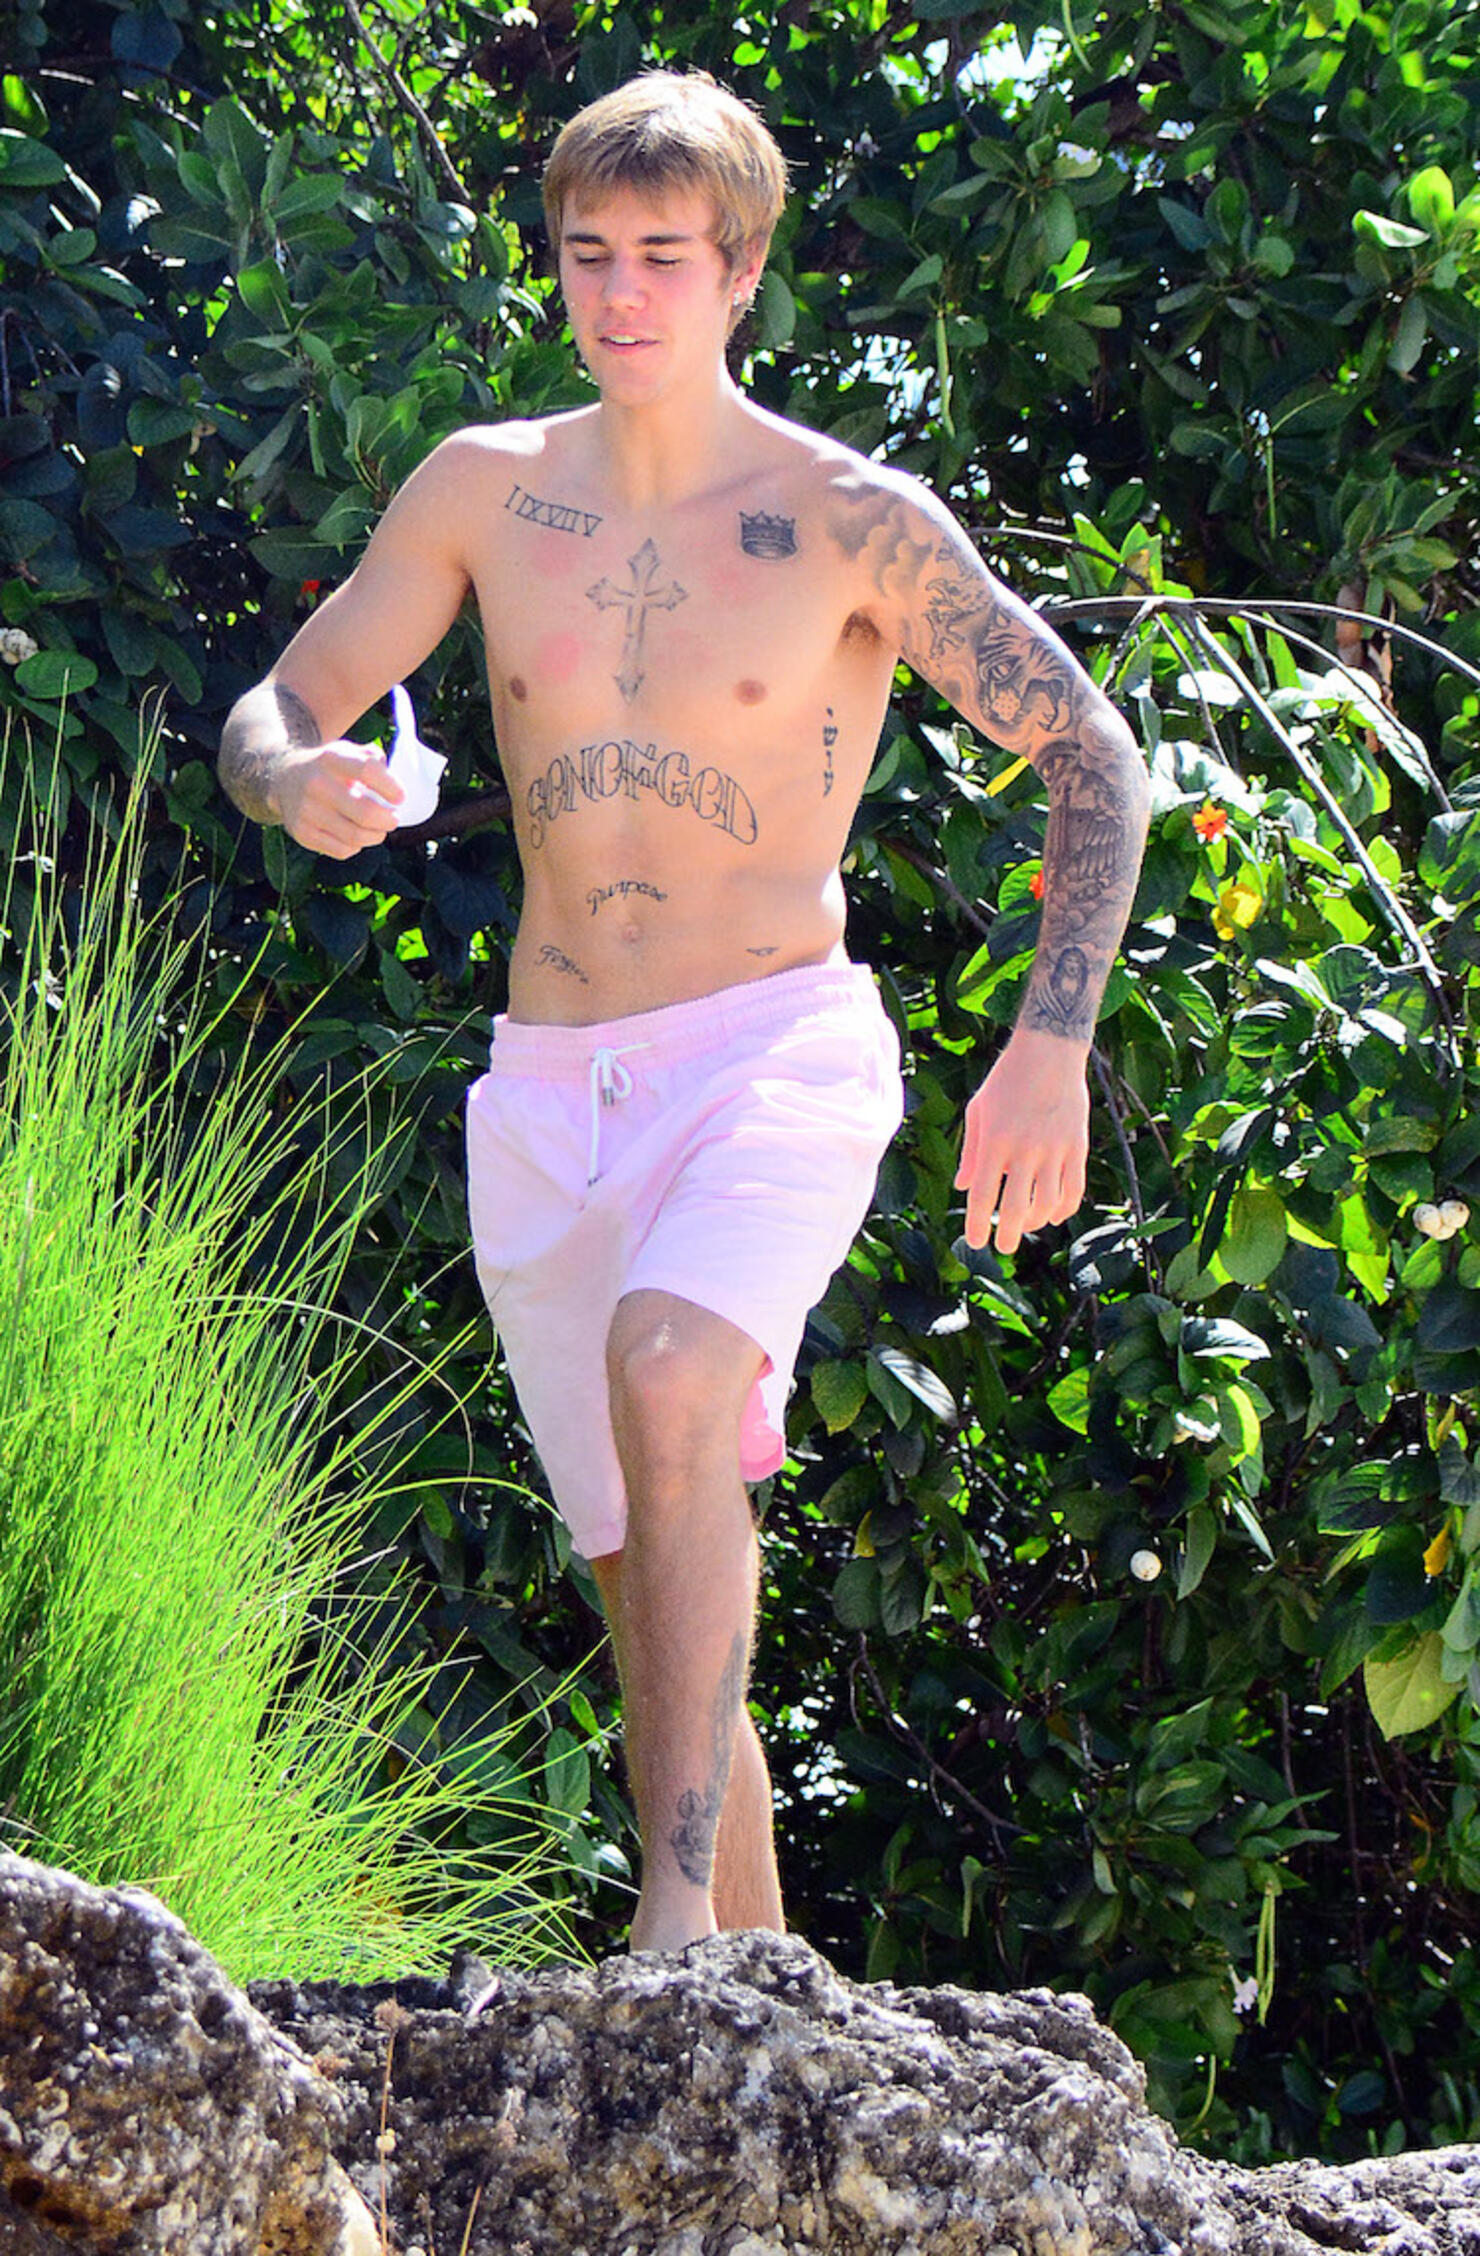 A shirtless Justin Bieber  delighted some bikini clad  with fans on the beach in Barbados.